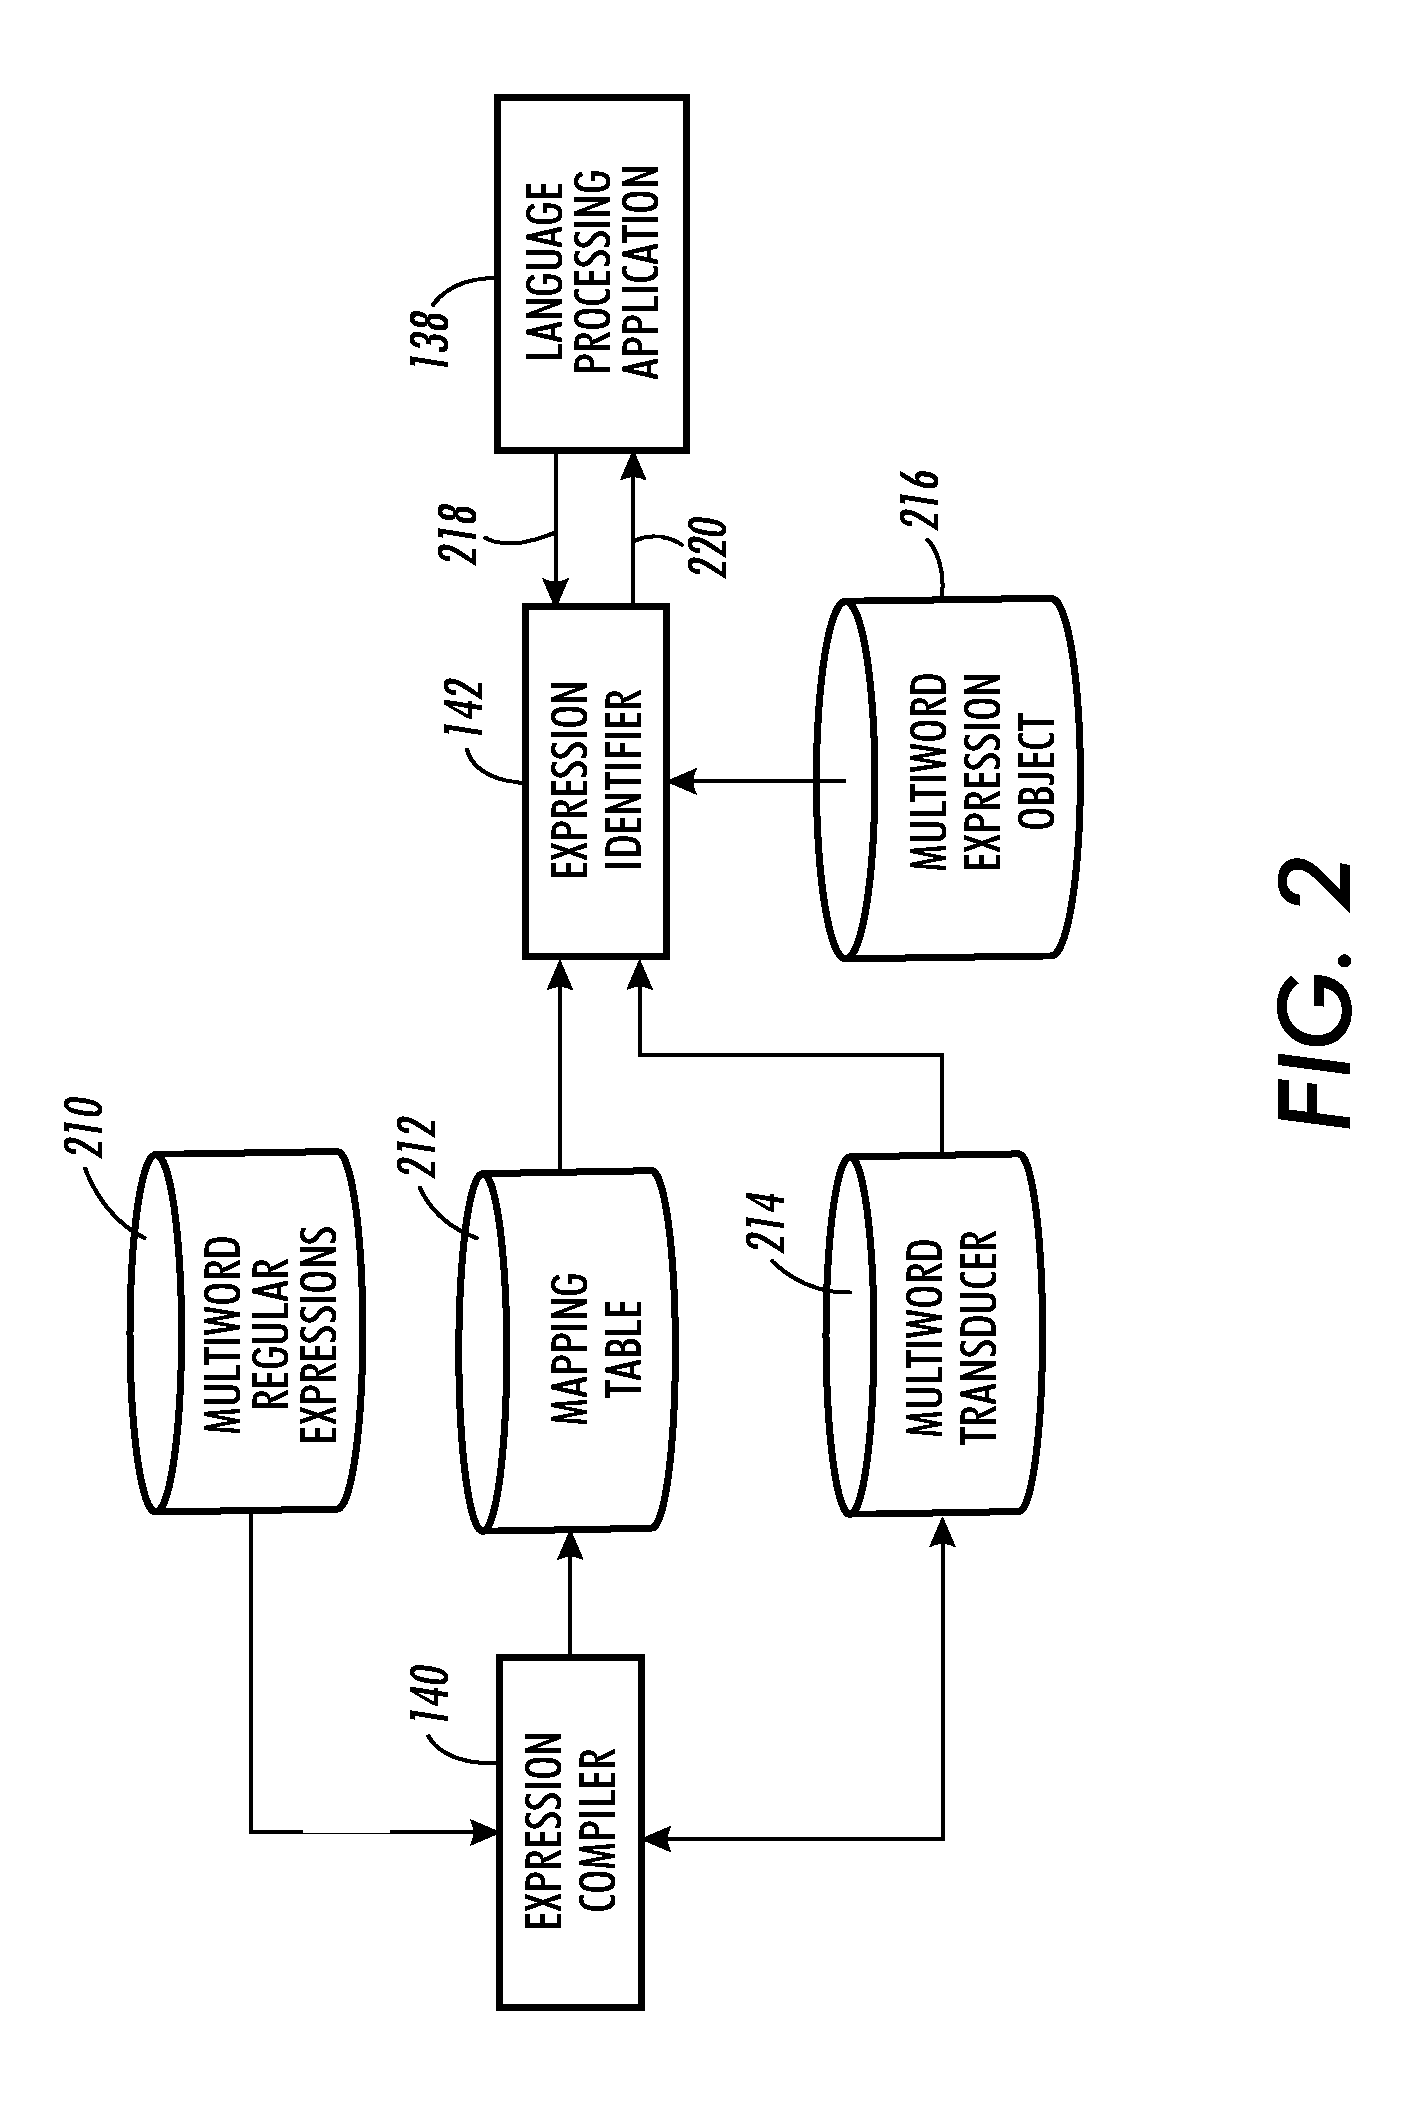 Method and apparatus for mapping multiword expressions to identifiers using finite-state networks